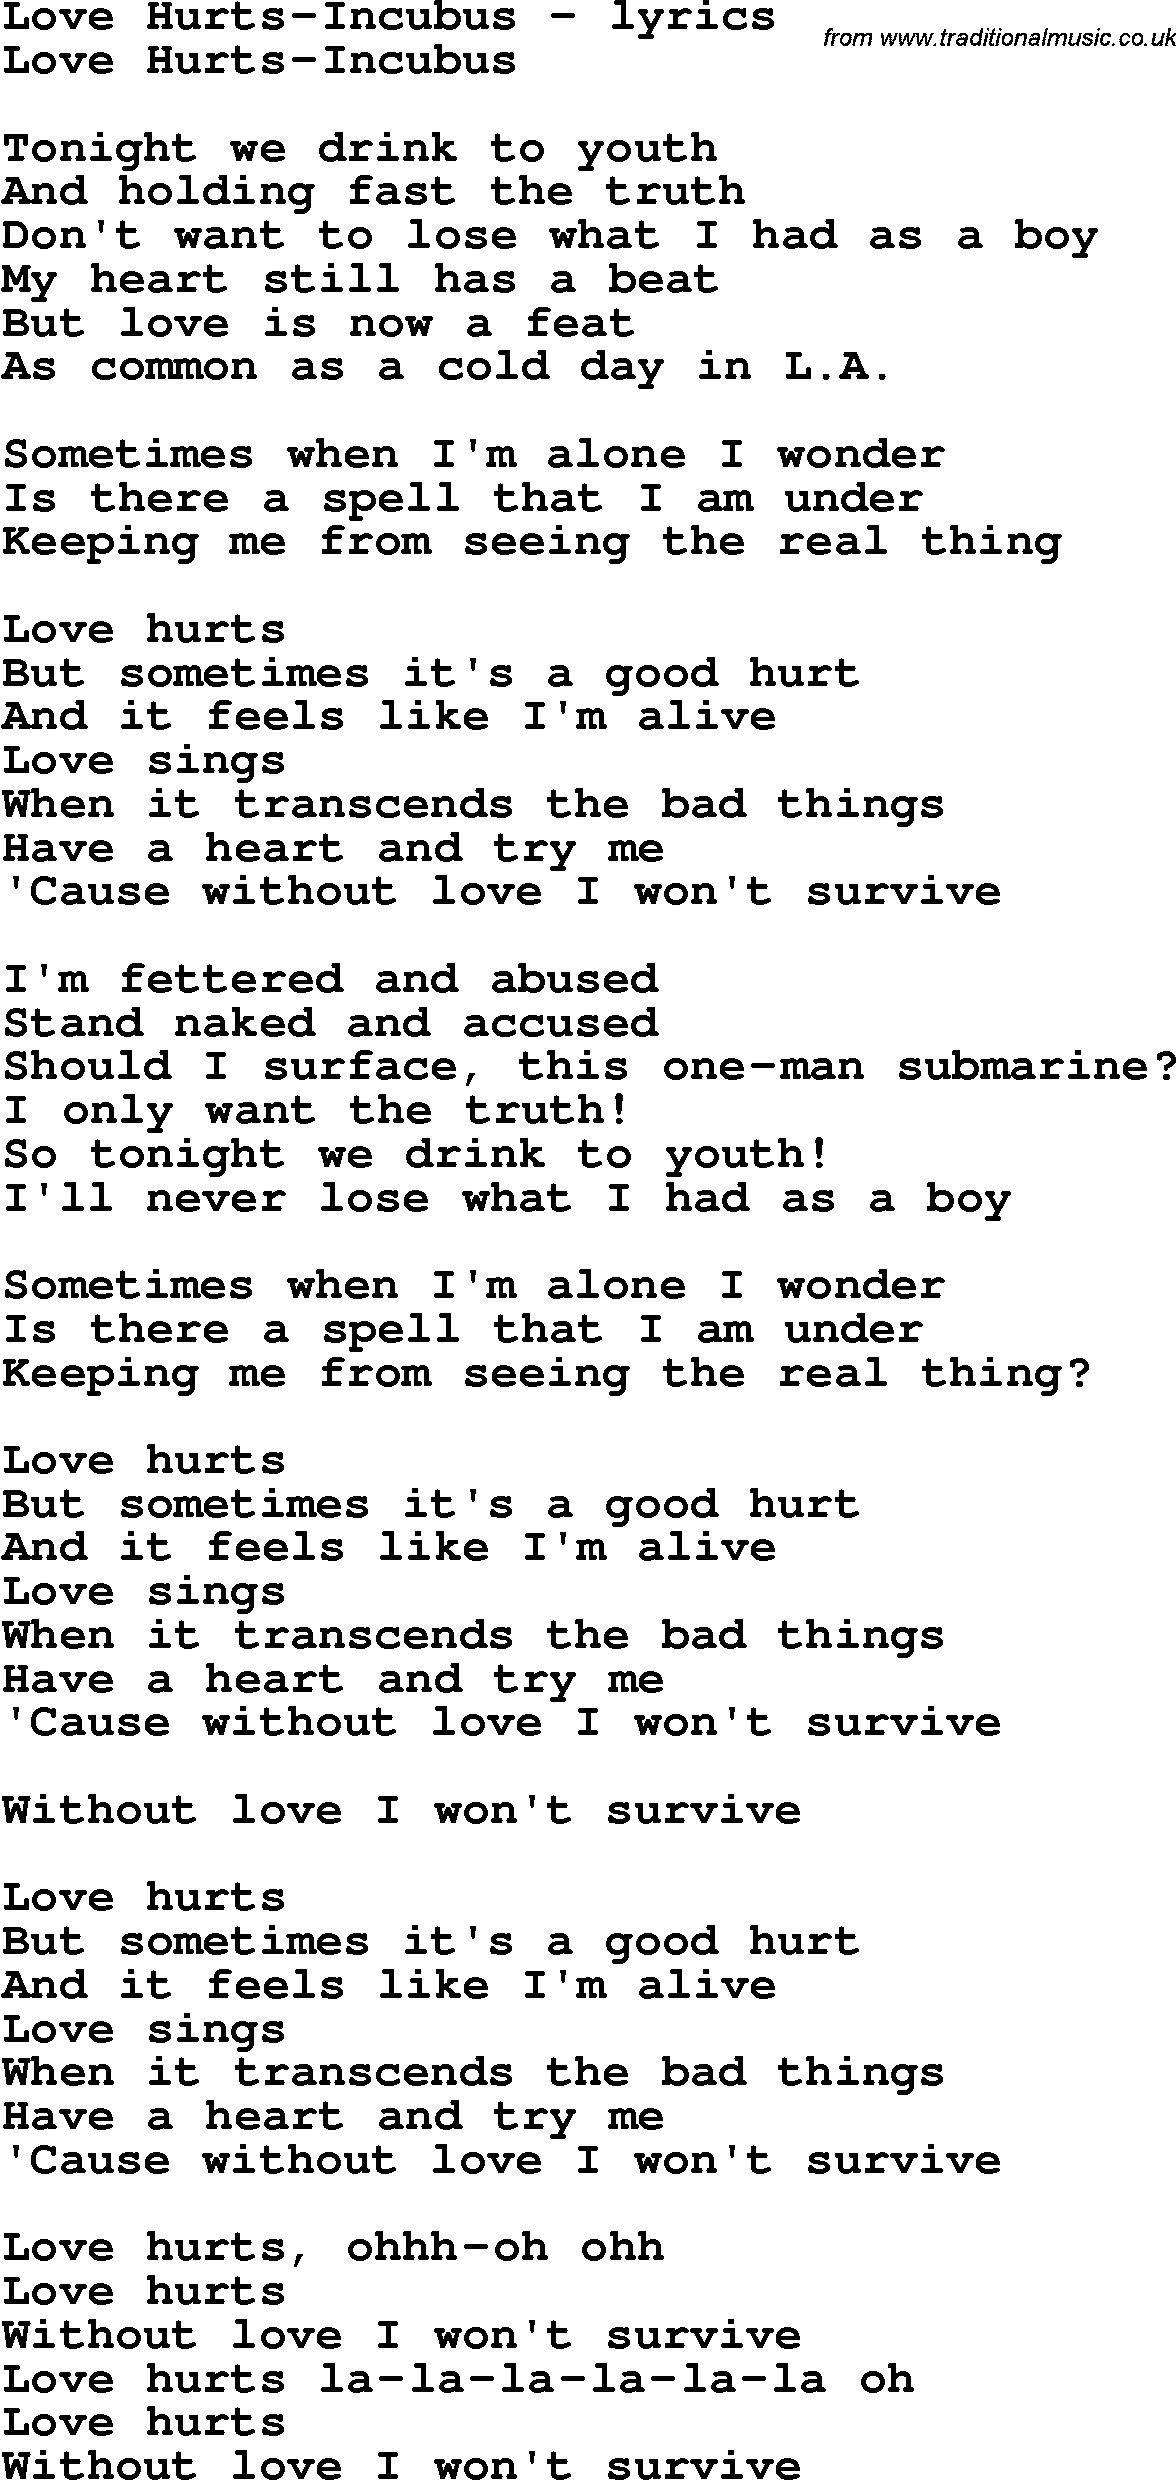 Love Song Lyrics for: Love Hurts-Incubus